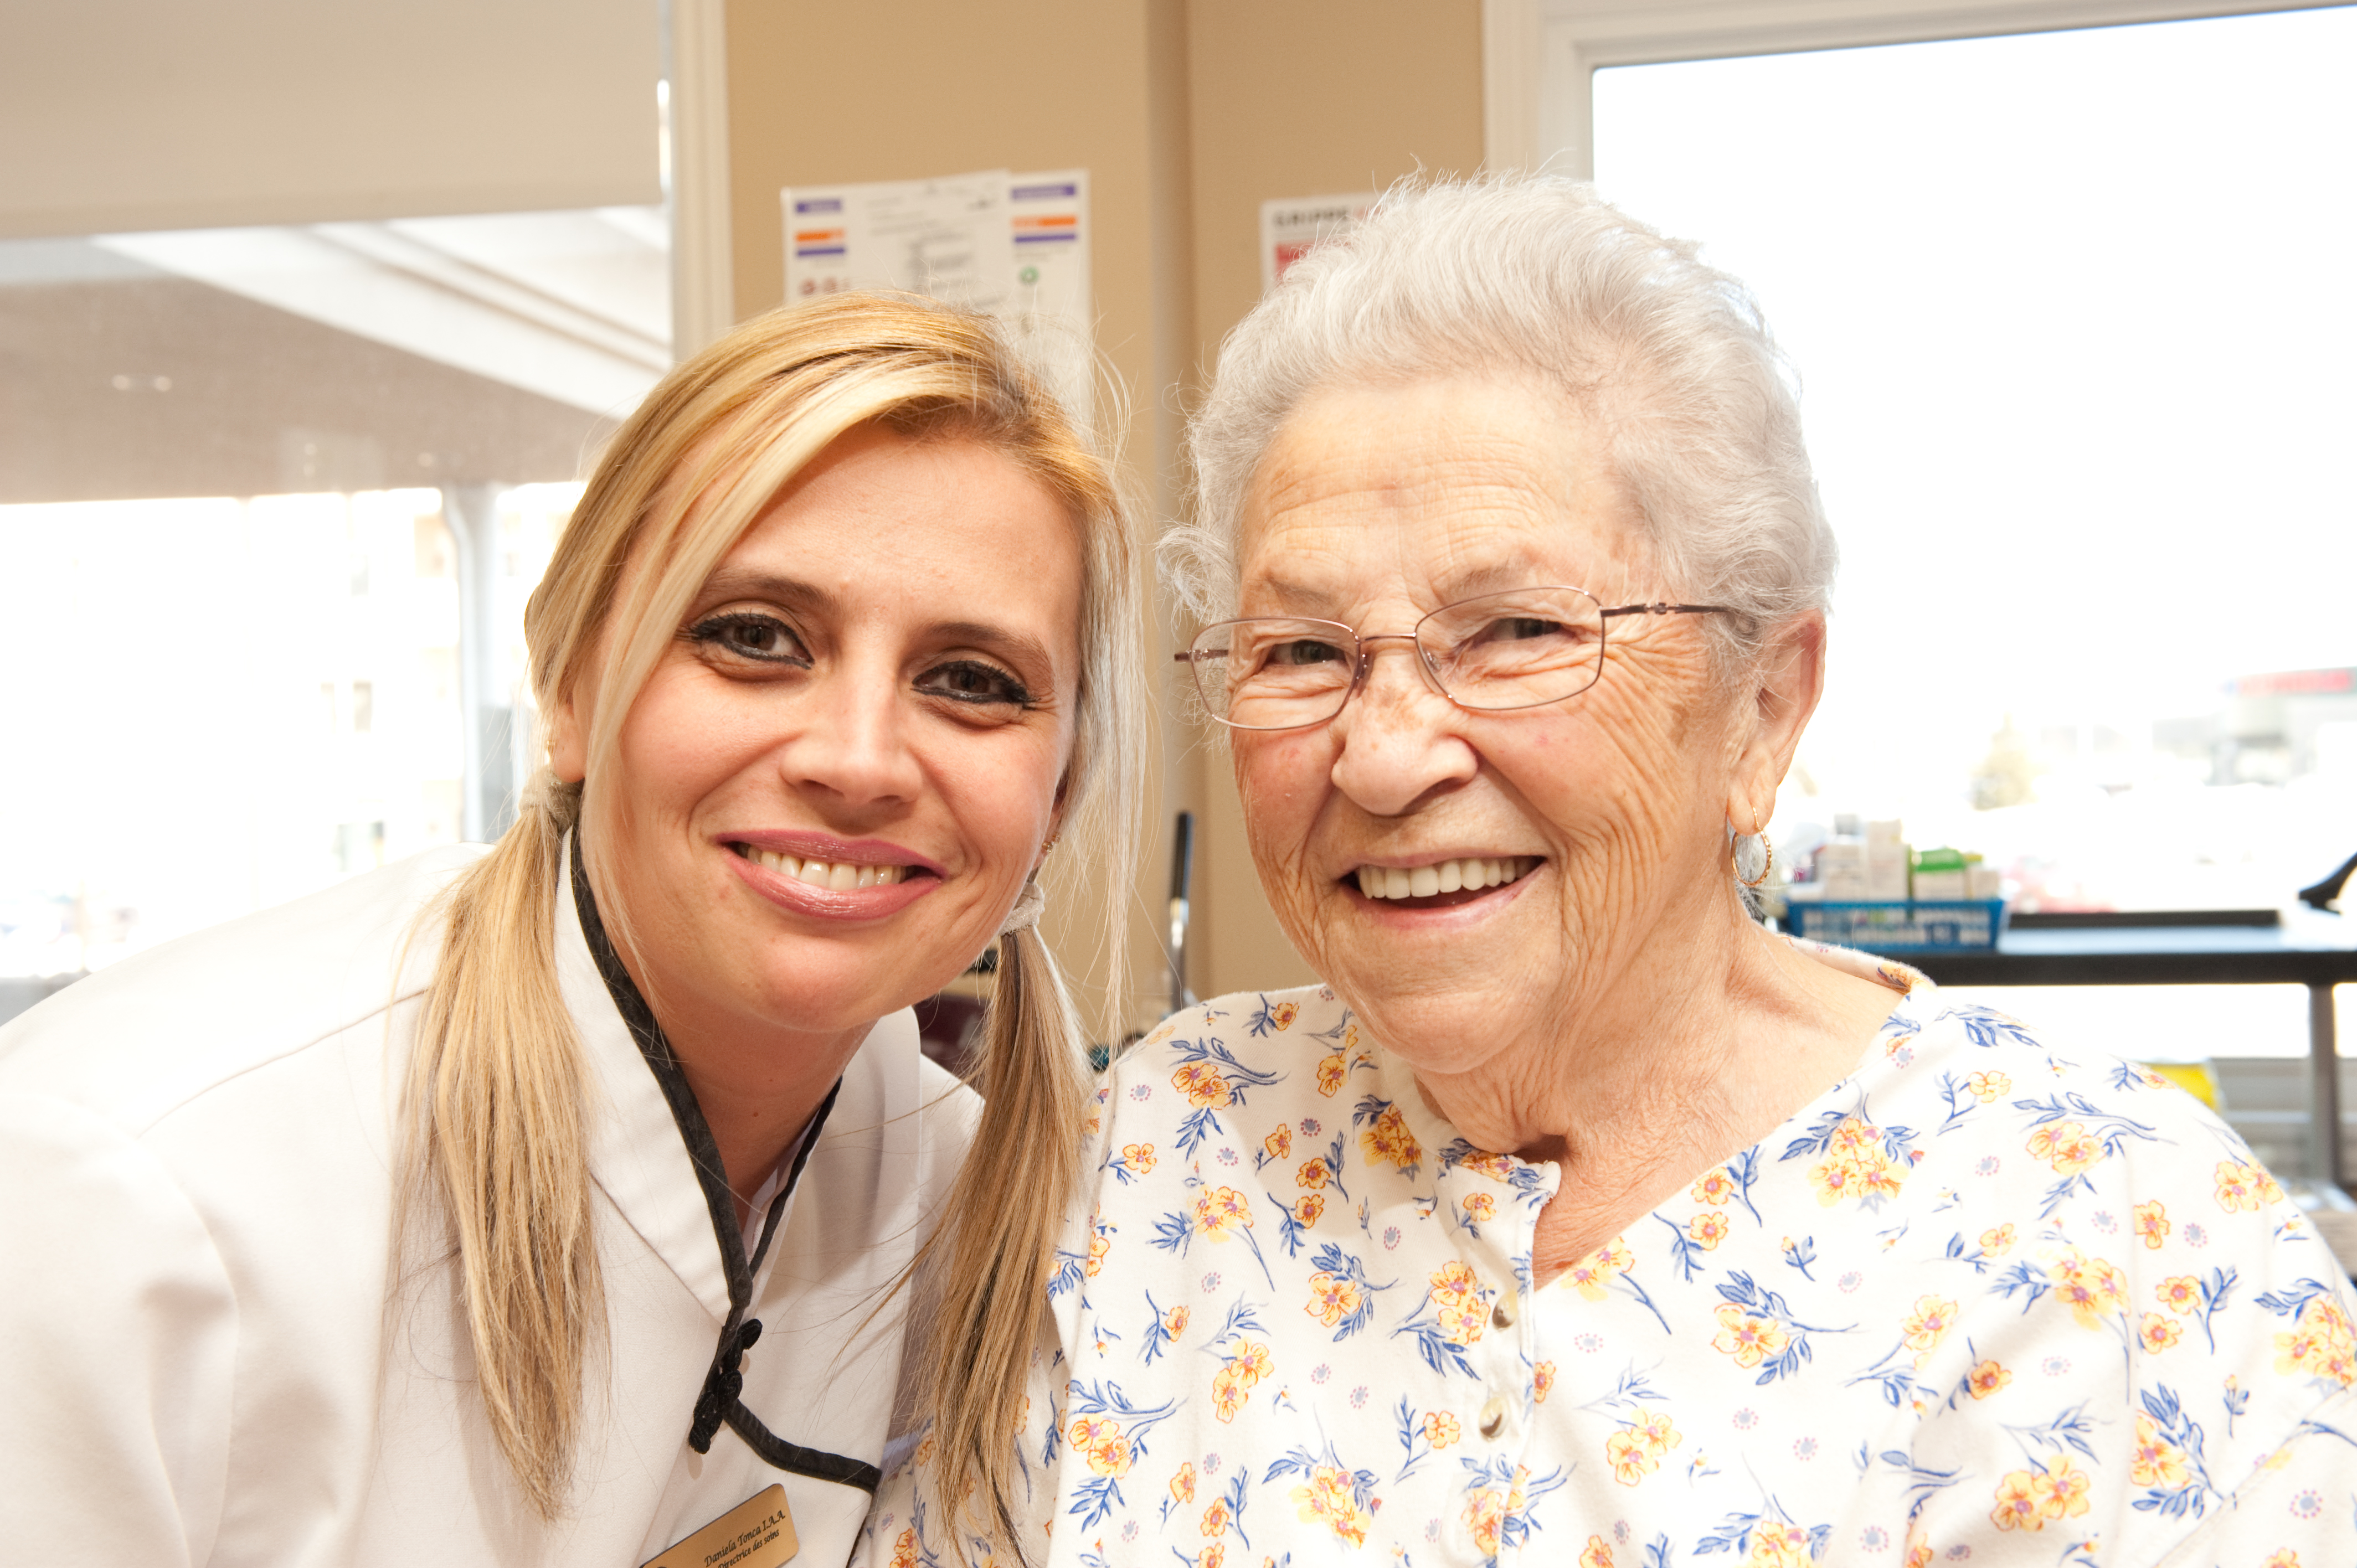 Caregiver and Older Woman in a health-care environment